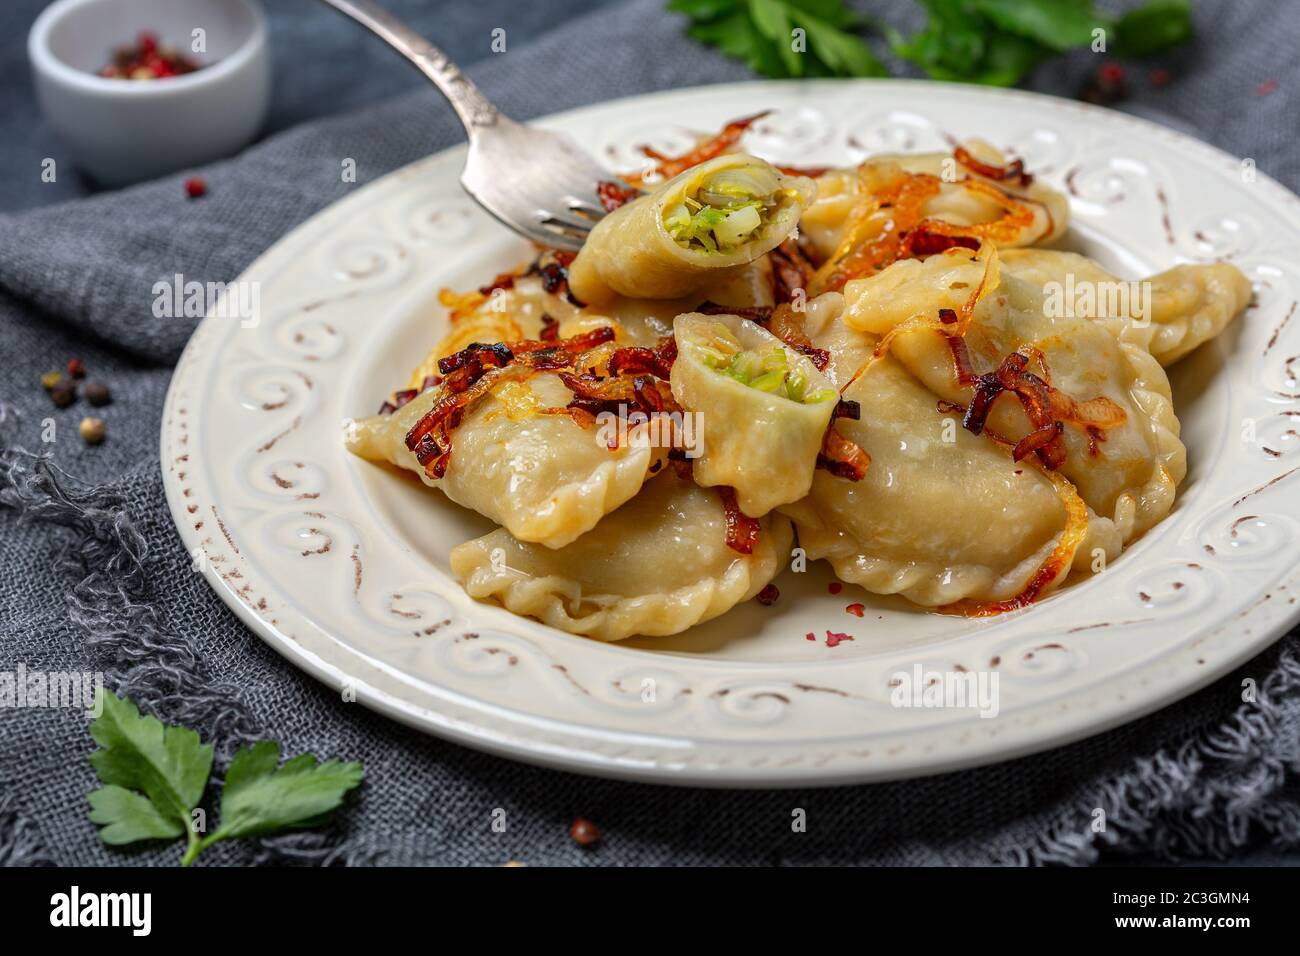 Dumplings stuffed with stewed cabbage and onions. Stock Photo